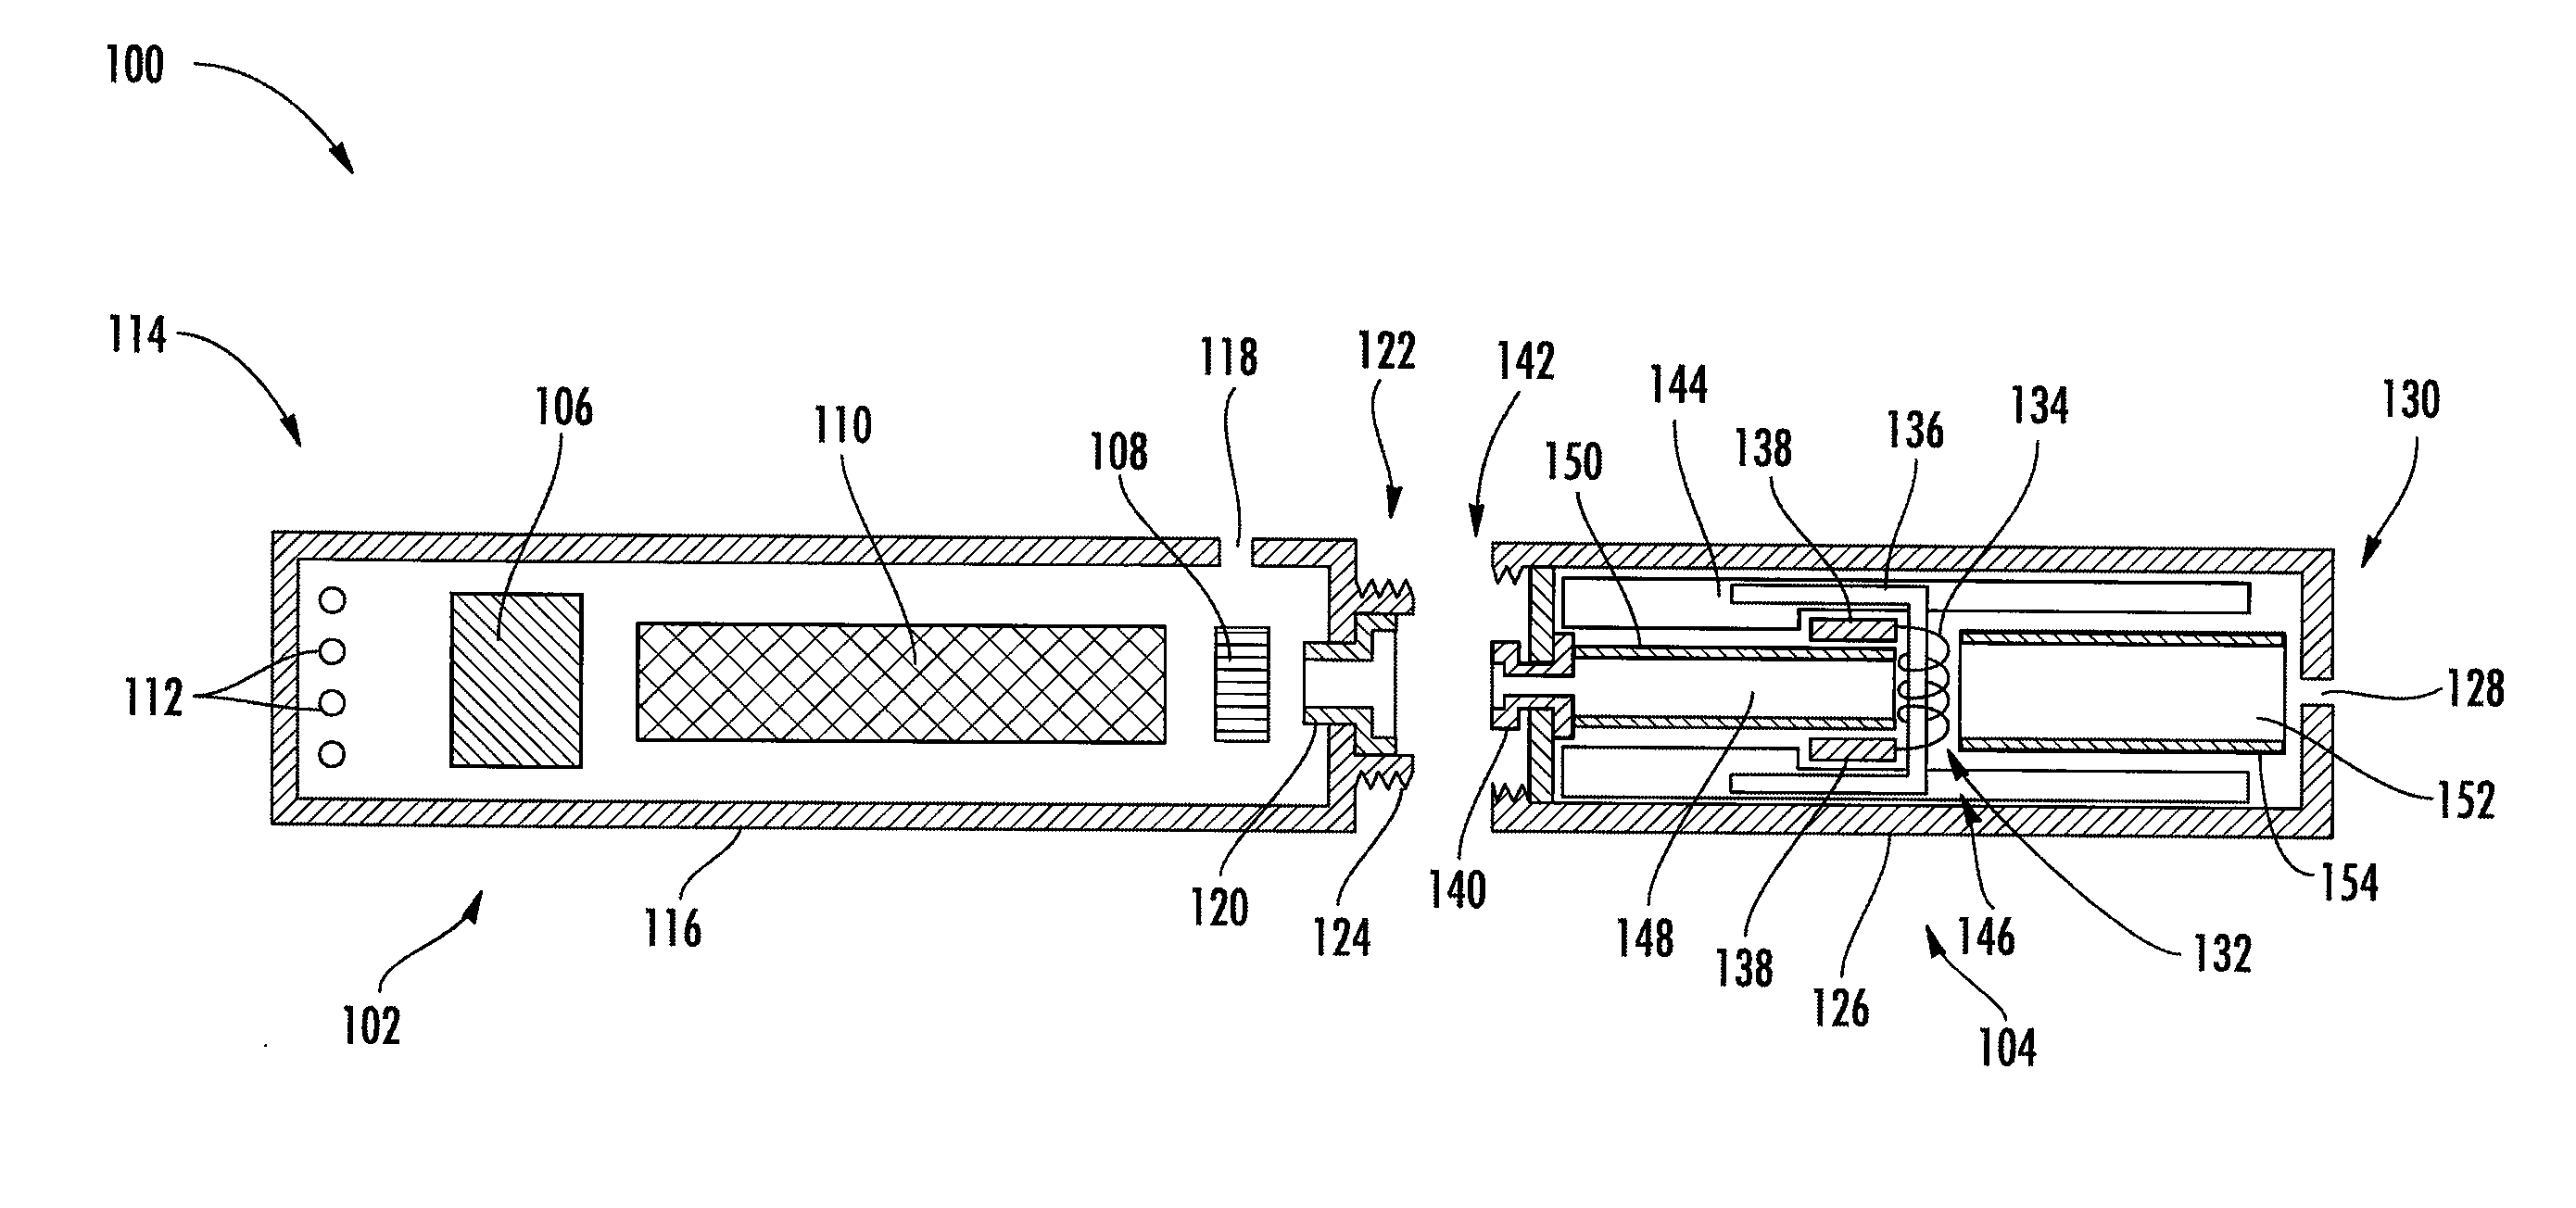 Aerosol Delivery Device and Related Method and Computer Program Product for Controlling an Aerosol Delivery Device Based on Input Characteristics